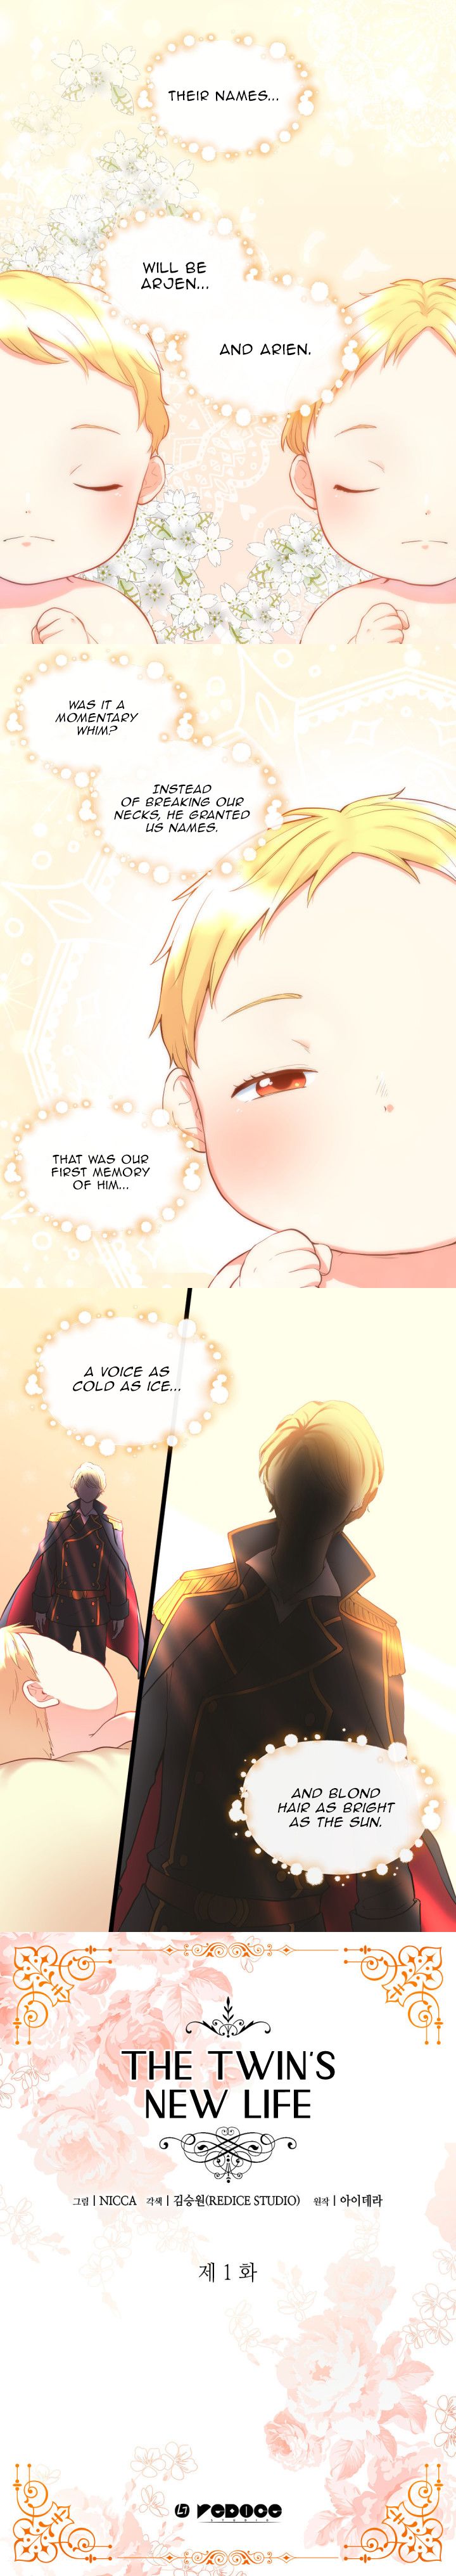 The Twin Siblings’ New Life - Page 1